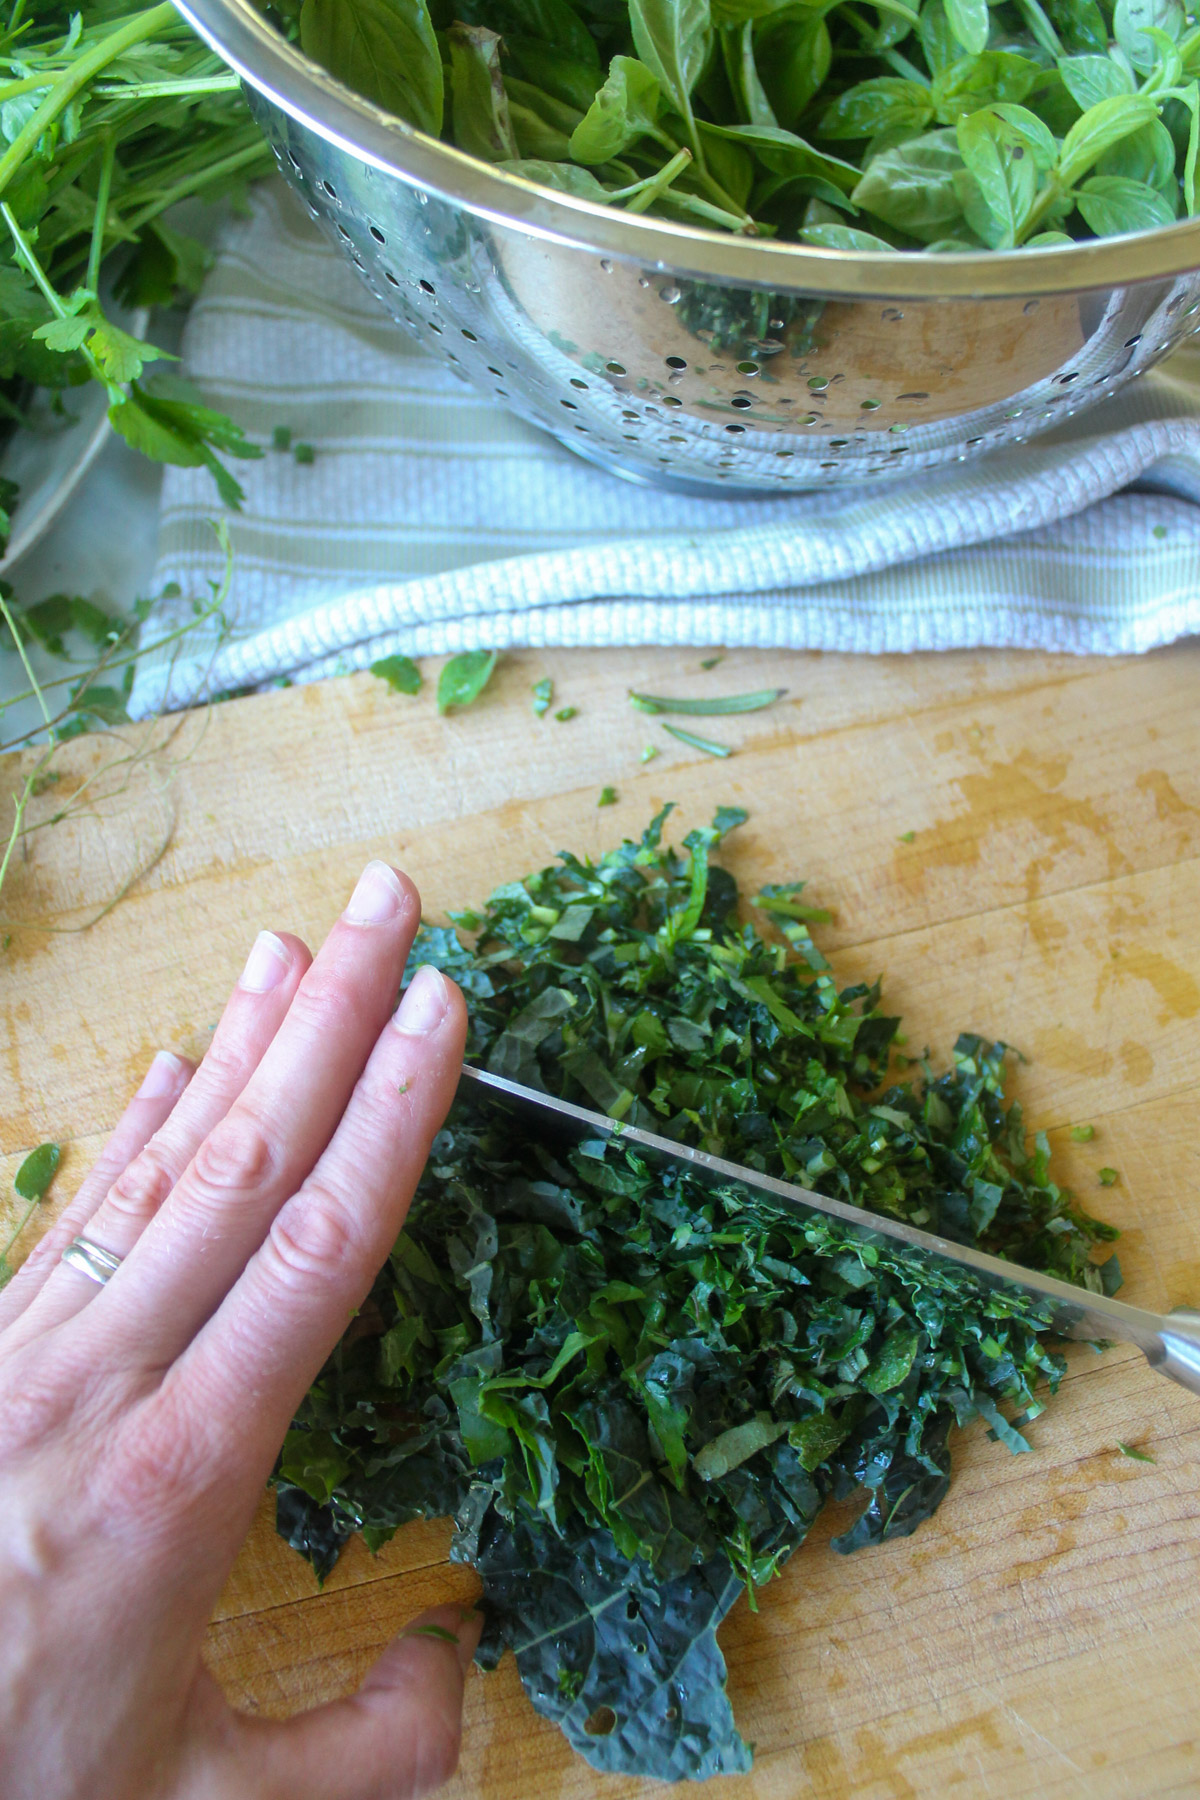 Chopping greens and herbs on a wooden cutting board.